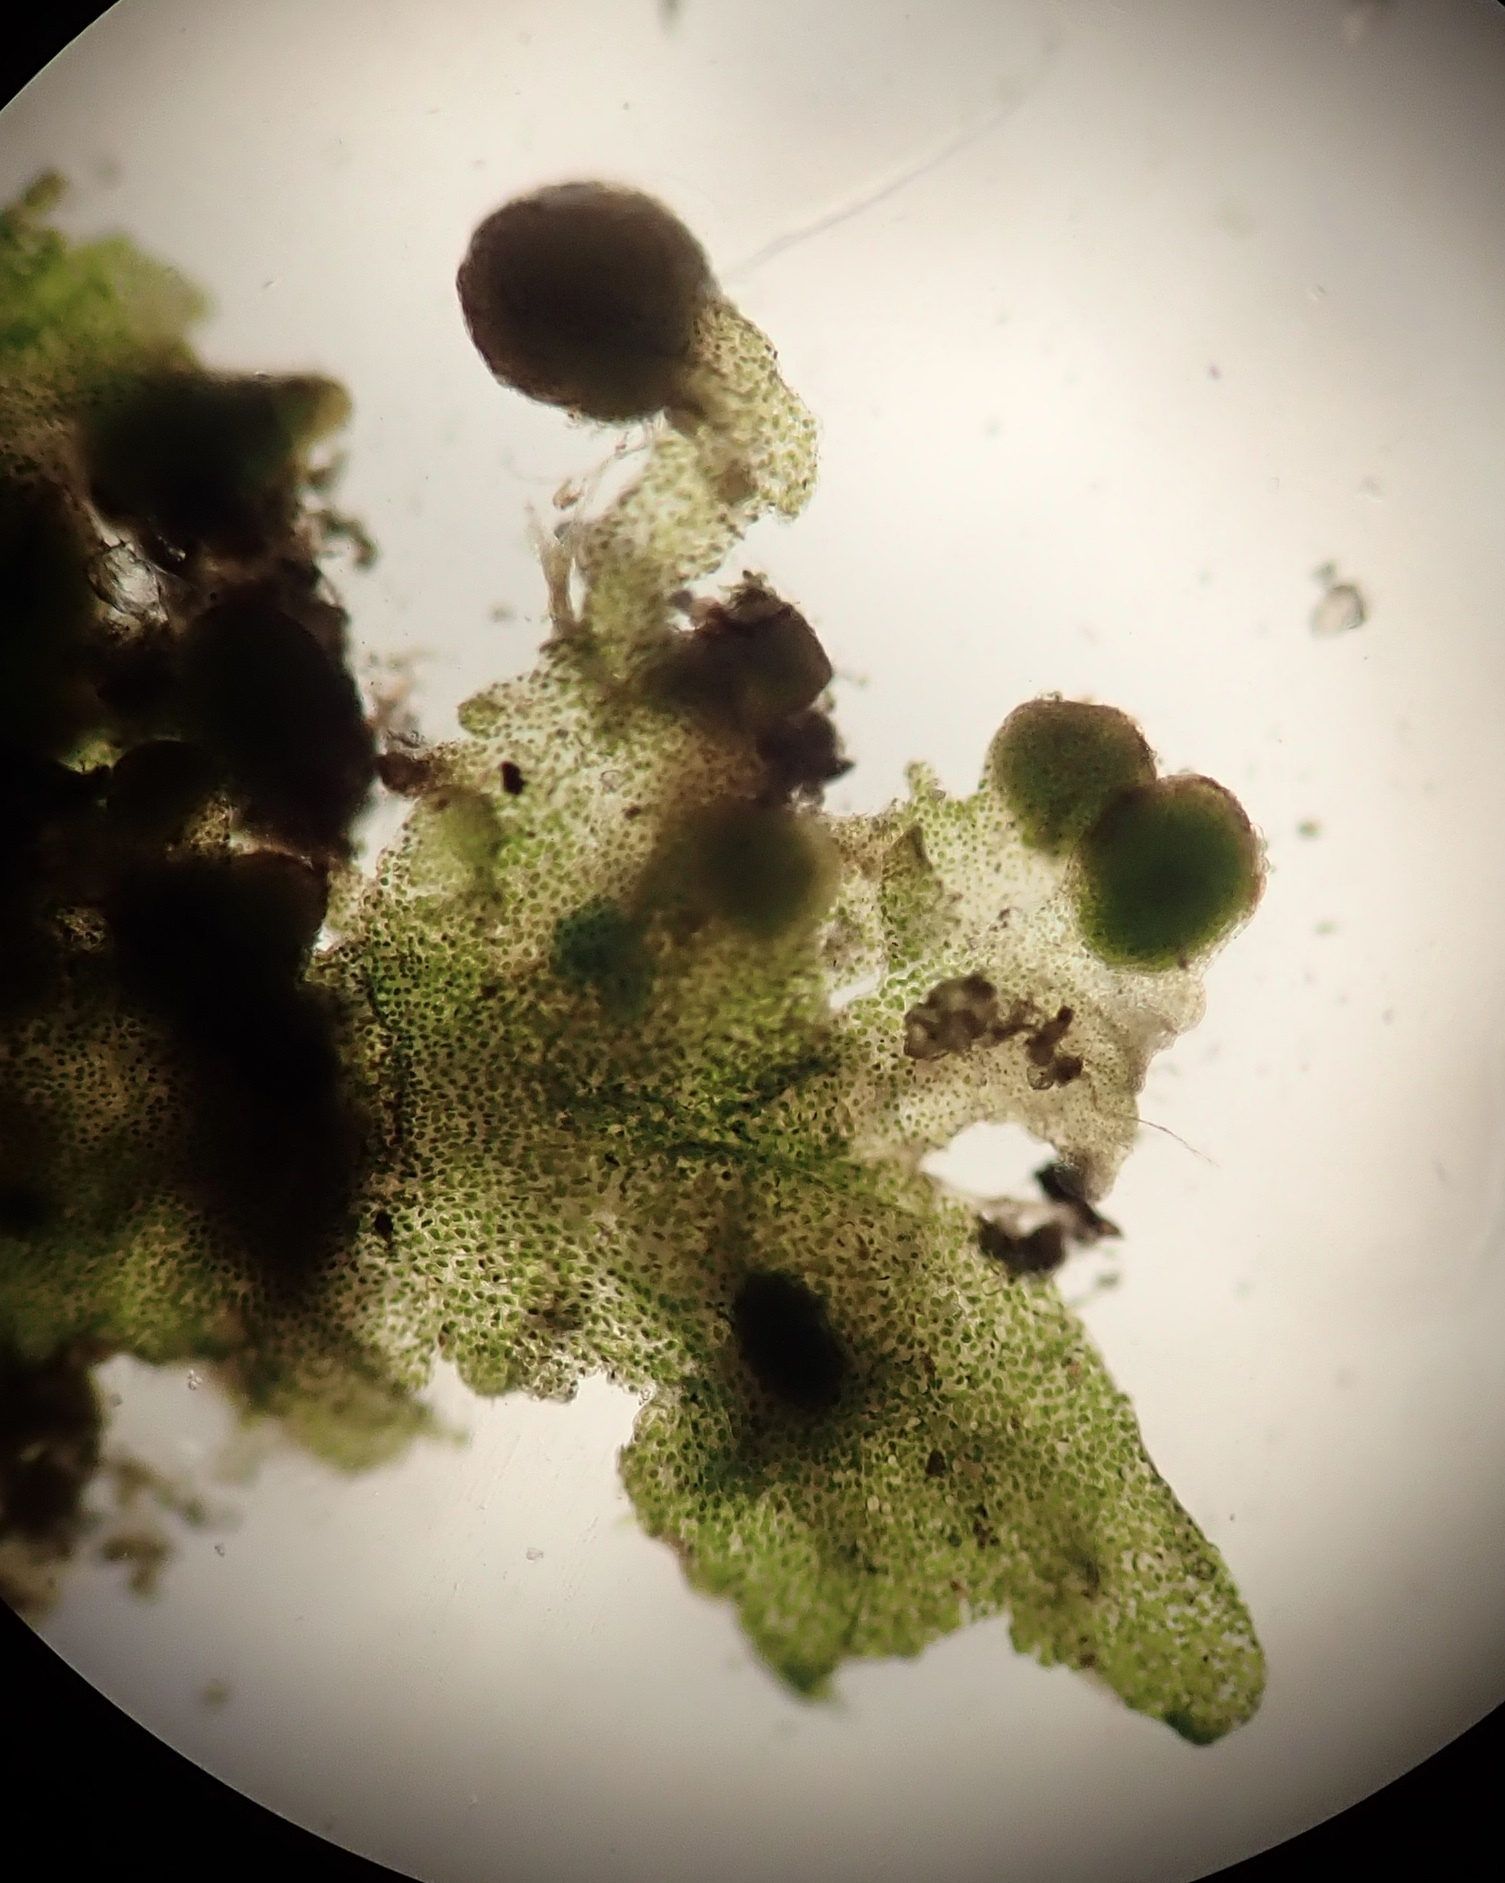 Piece of a thallus viewed under a microscope. The cells of the thallus each have a single, large green plastid, which is the only visible organelle. 